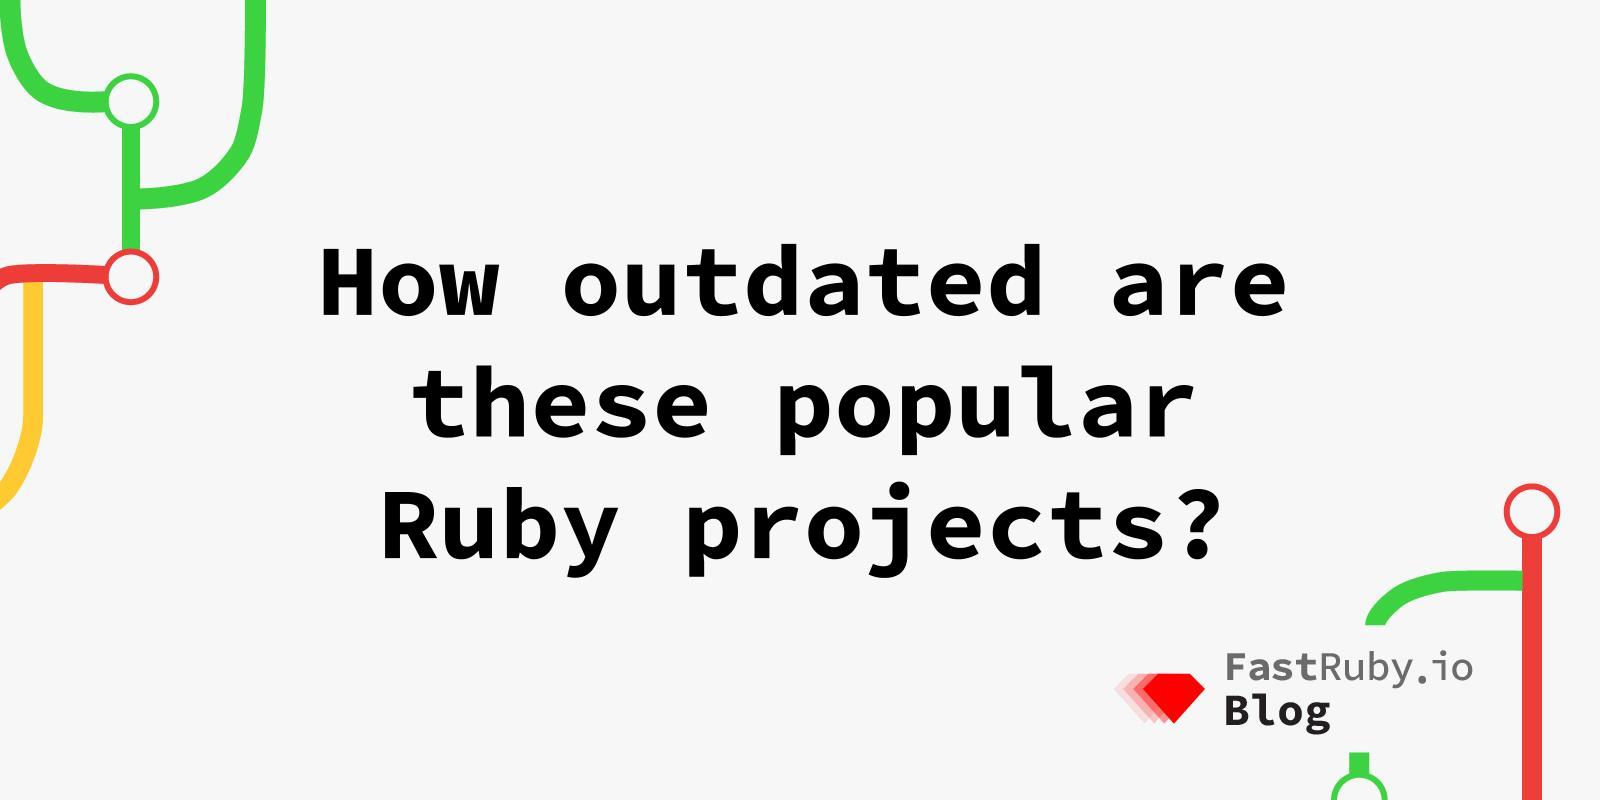 How outdated are these popular Ruby projects?